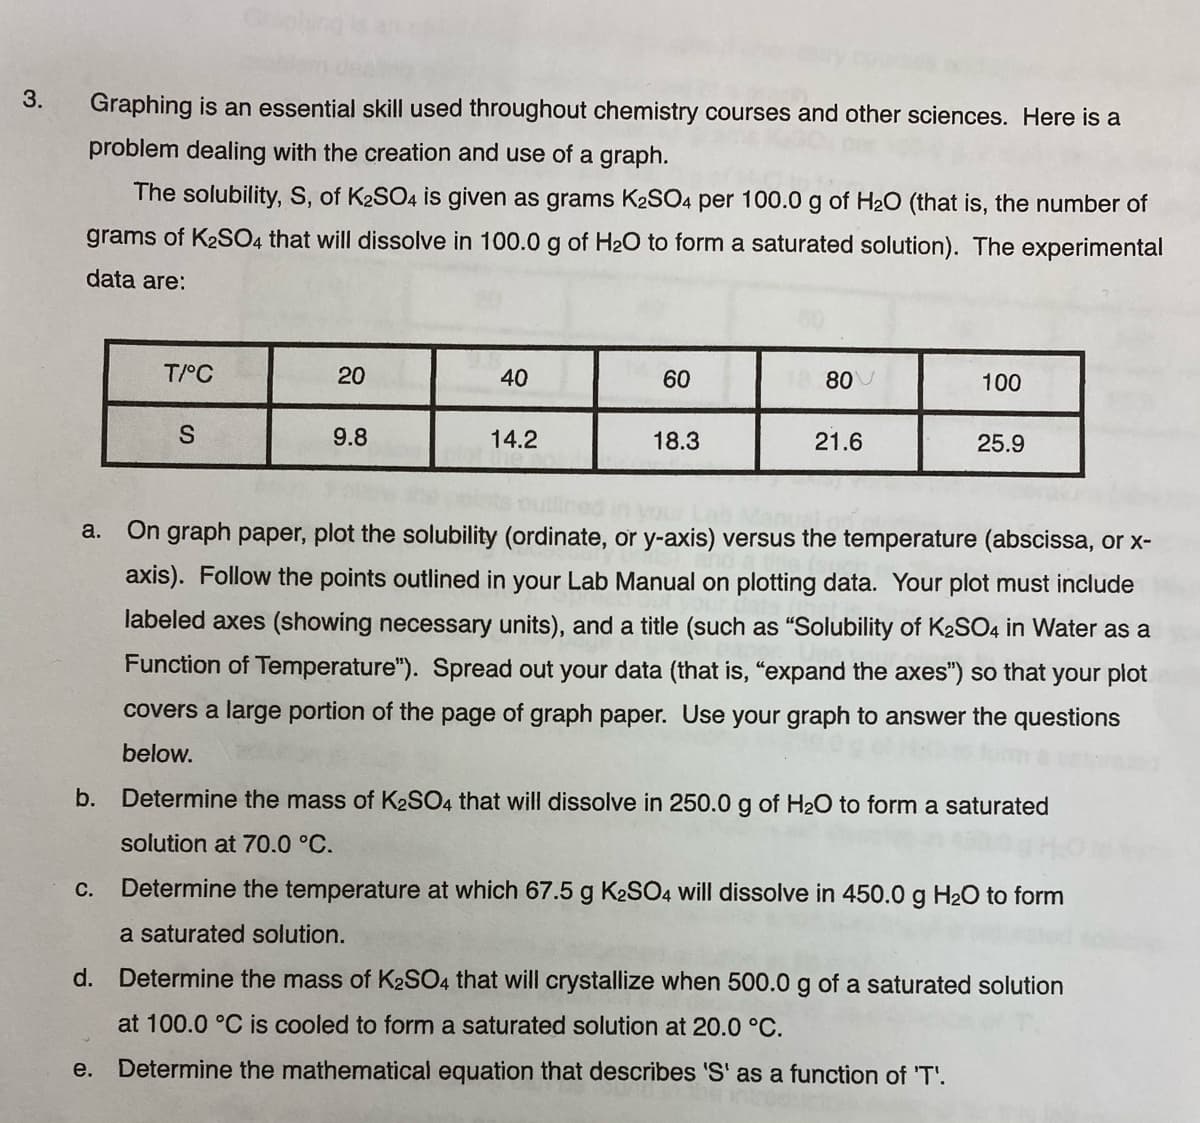 3.
Graphing is an essential skill used throughout chemistry courses and other sciences. Here is a
problem dealing with the creation and use of a graph.
The solubility, S, of K2SO4 is given as grams K2SO4 per 100.0 g of H2O (that is, the number of
grams of K2S04 that will dissolve in 100.0 g of H2O to form a saturated solution). The experimental
data are:
T/°C
20
40
60
80
100
9.8
14.2
18.3
21.6
25.9
On graph paper, plot the solubility (ordinate, or y-axis) versus the temperature (abscissa, or x-
a.
axis). Follow the points outlined in your Lab Manual on plotting data. Your plot must include
labeled axes (showing necessary units), and a title (such as "Solubility of K2SO4 in Water as a
Function of Temperature"). Spread out your data (that is, "expand the axes") so that your plot
covers a large portion of the page of graph paper. Use your graph to answer the questions
below.
b. Determine the mass of K2SO4 that will dissolve in 250.0 g of H20 to form a saturated
solution at 70.0 °C.
С.
Determine the temperature at which 67.5 g K2SO4 will dissolve in 450.0 g H2O to form
a saturated solution.
d. Determine the mass of K2SO4 that will crystallize when 500.0 g of a saturated solution
at 100.0 °C is cooled to form a saturated solution at 20.0 °C.
e. Determine the mathematical equation that describes 'S' as a function of 'T'.
